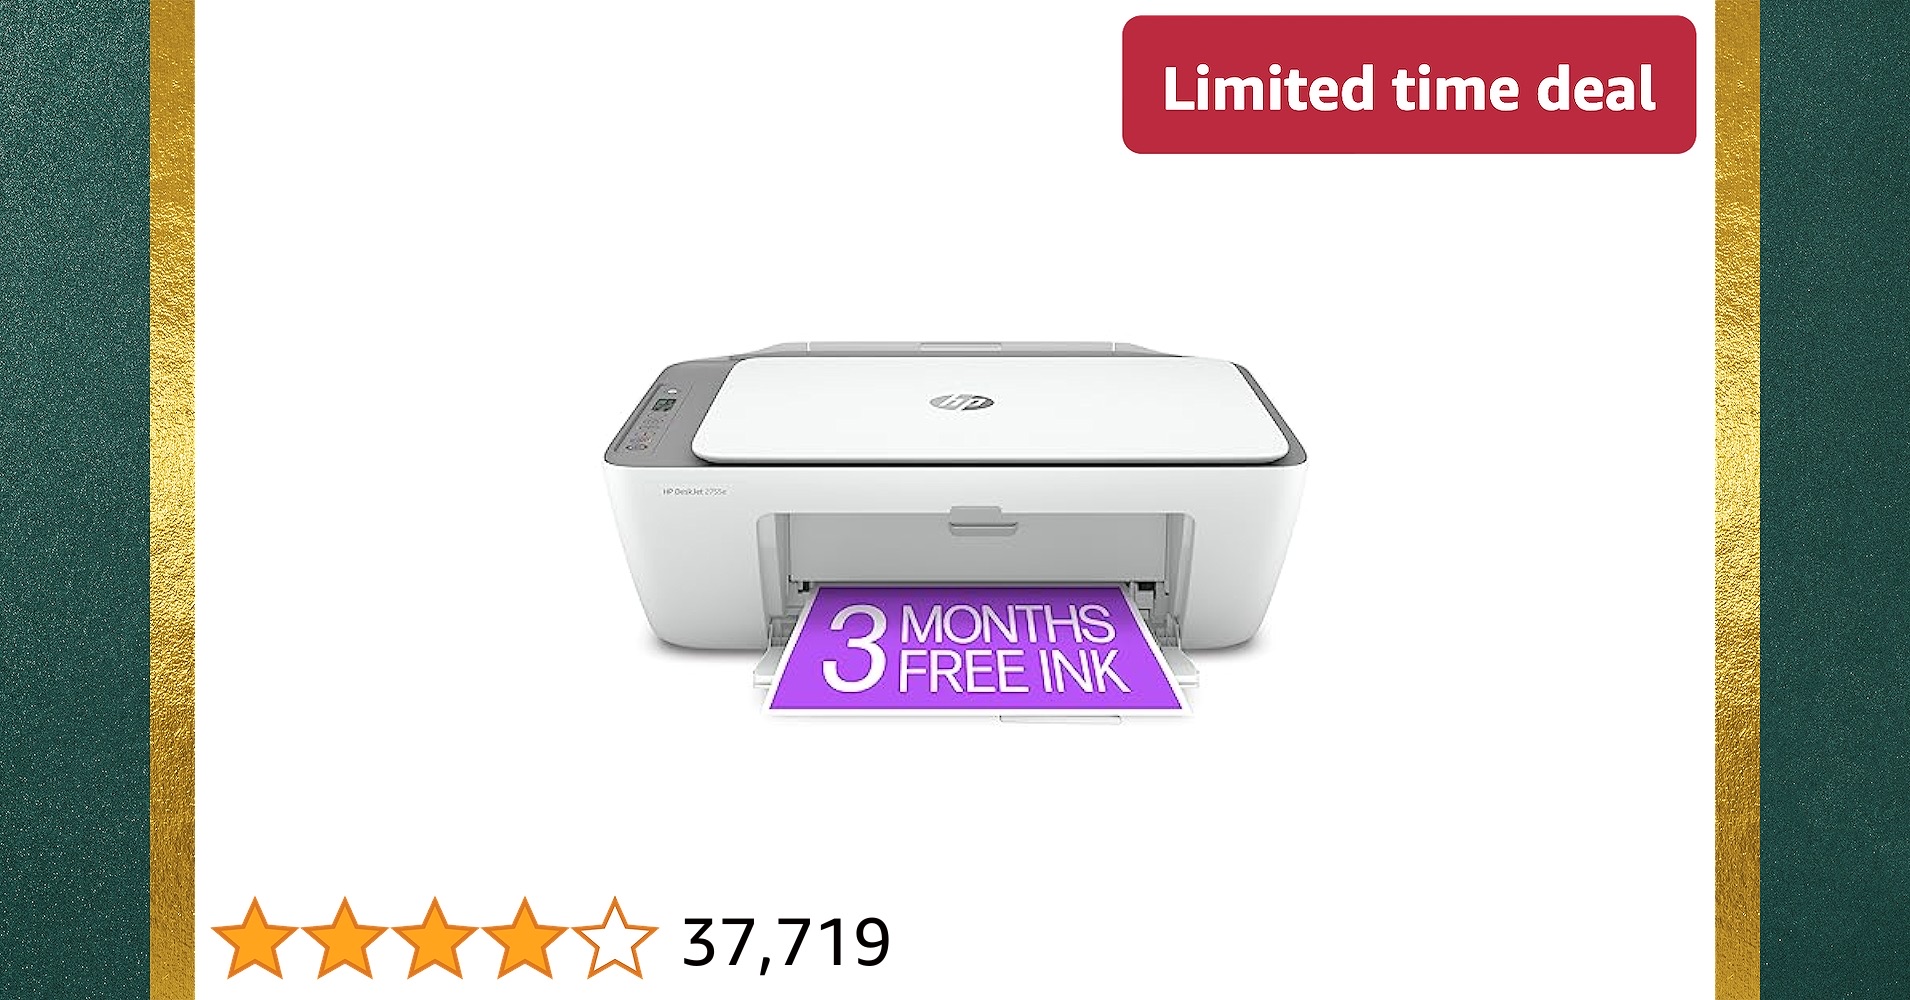 Limited-time deal: HP DeskJet 2755e Wireless Color inkjet-printer, Print, scan, copy, Easy setup, Mobile printing, Best-for home, Instant Ink with HP+,white